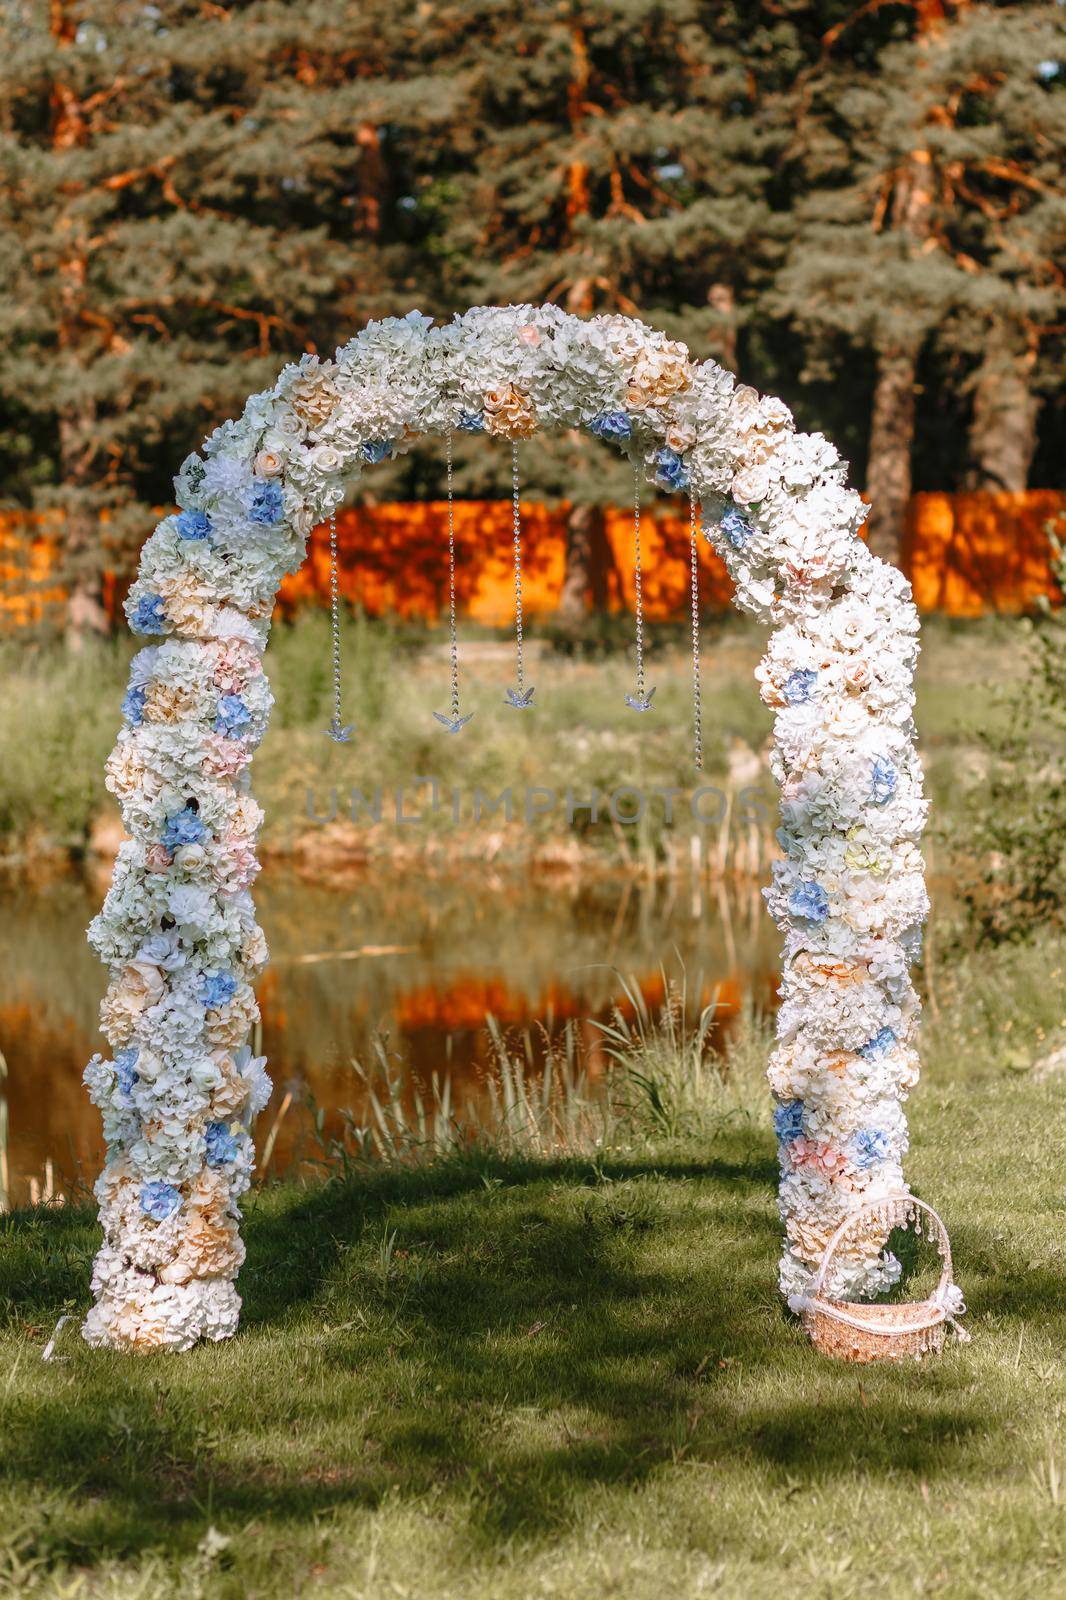 Decorative wedding arch for a photo shoot, standing on the lawn against the background of a pond